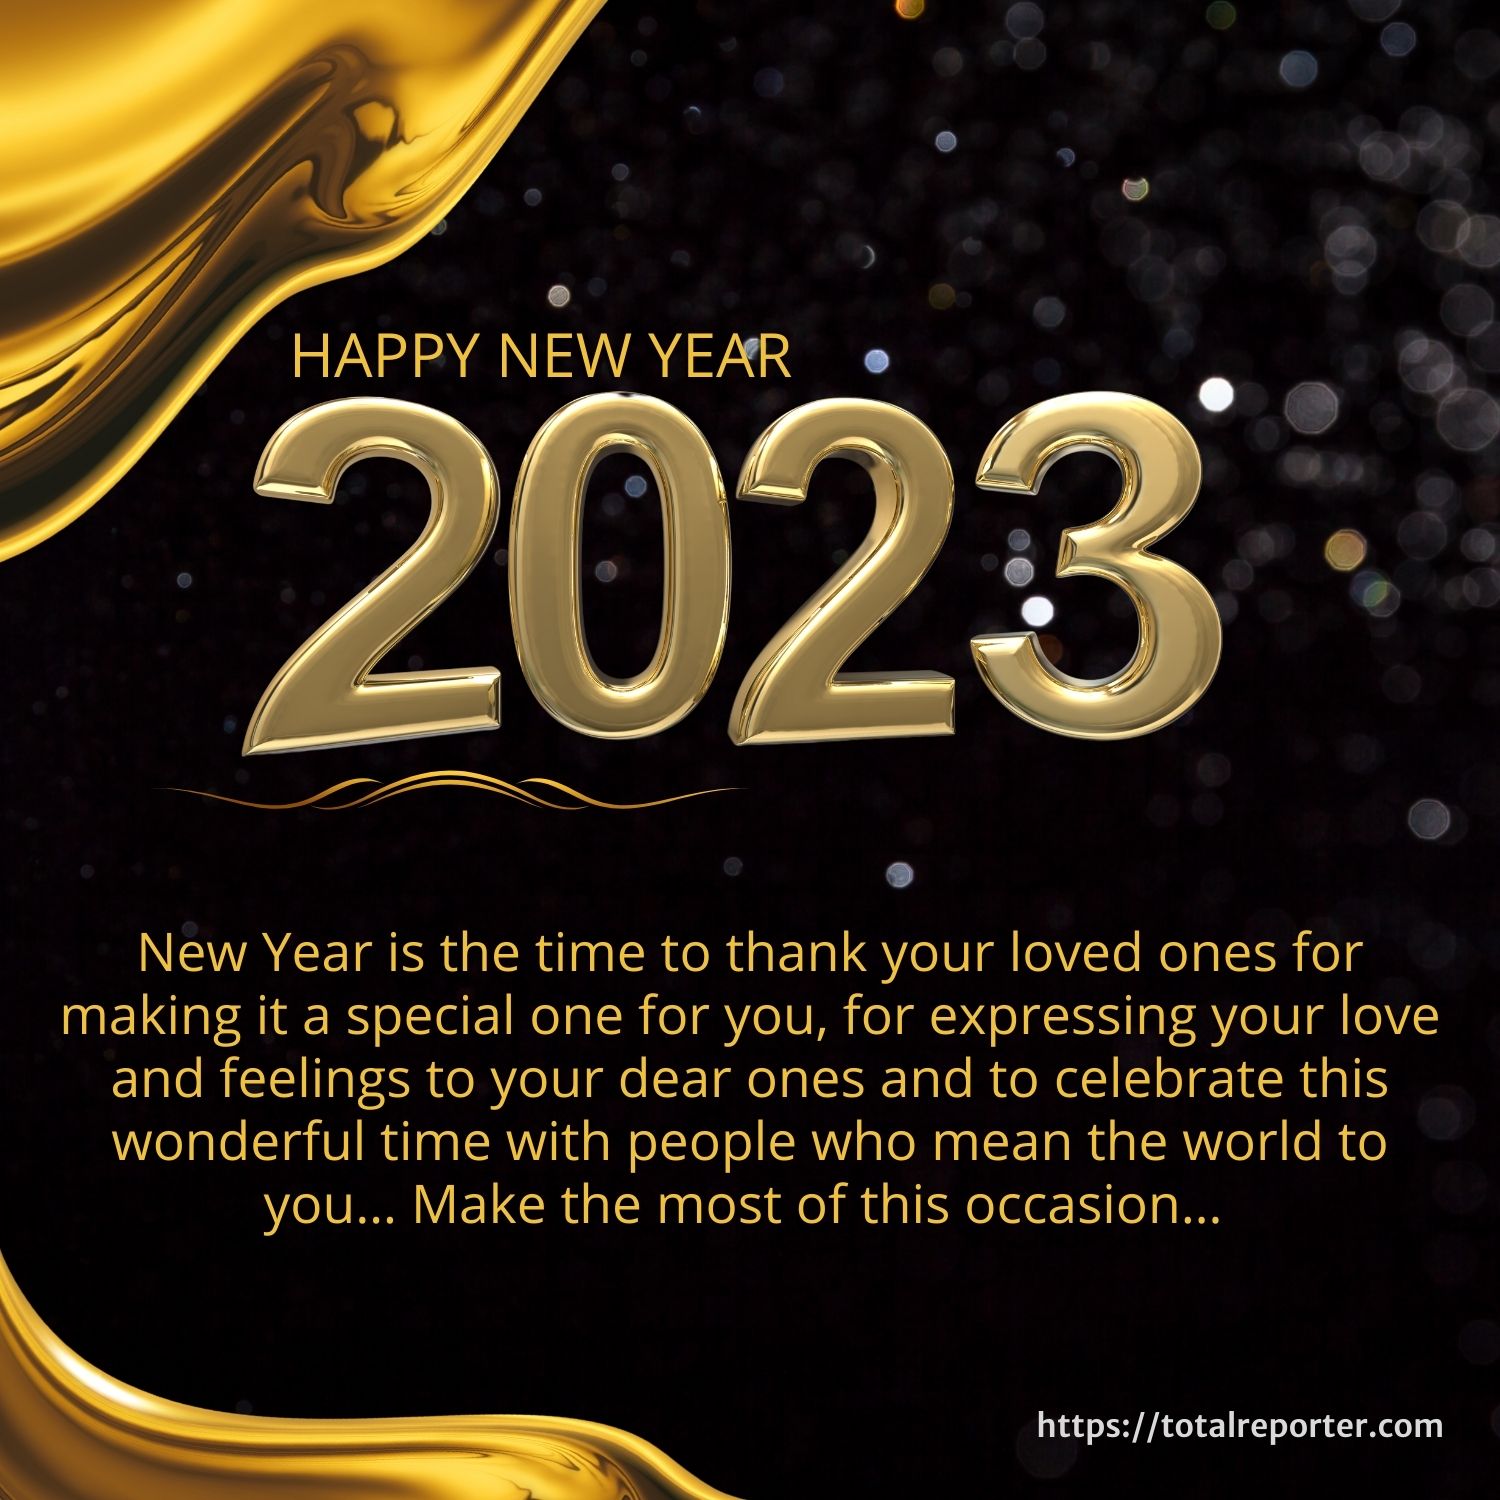 New Year wishes Images for Facebook